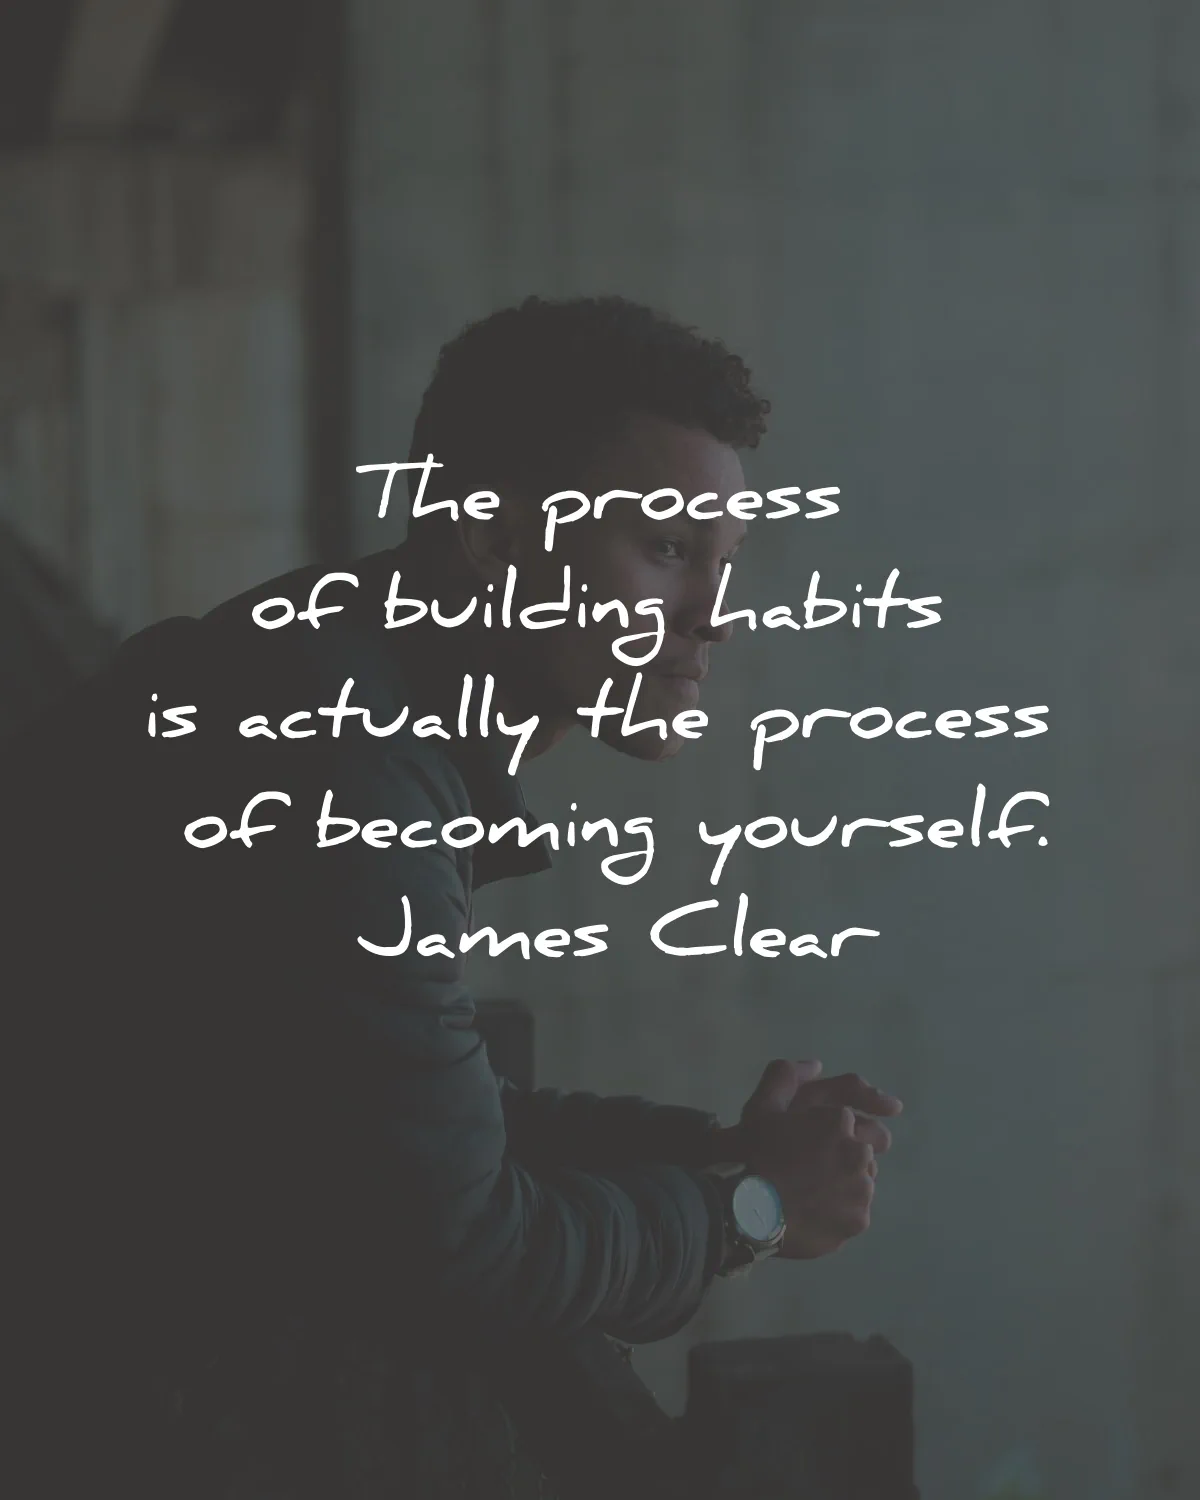 atomic habits quotes james clear process building becoming yourself wisdom